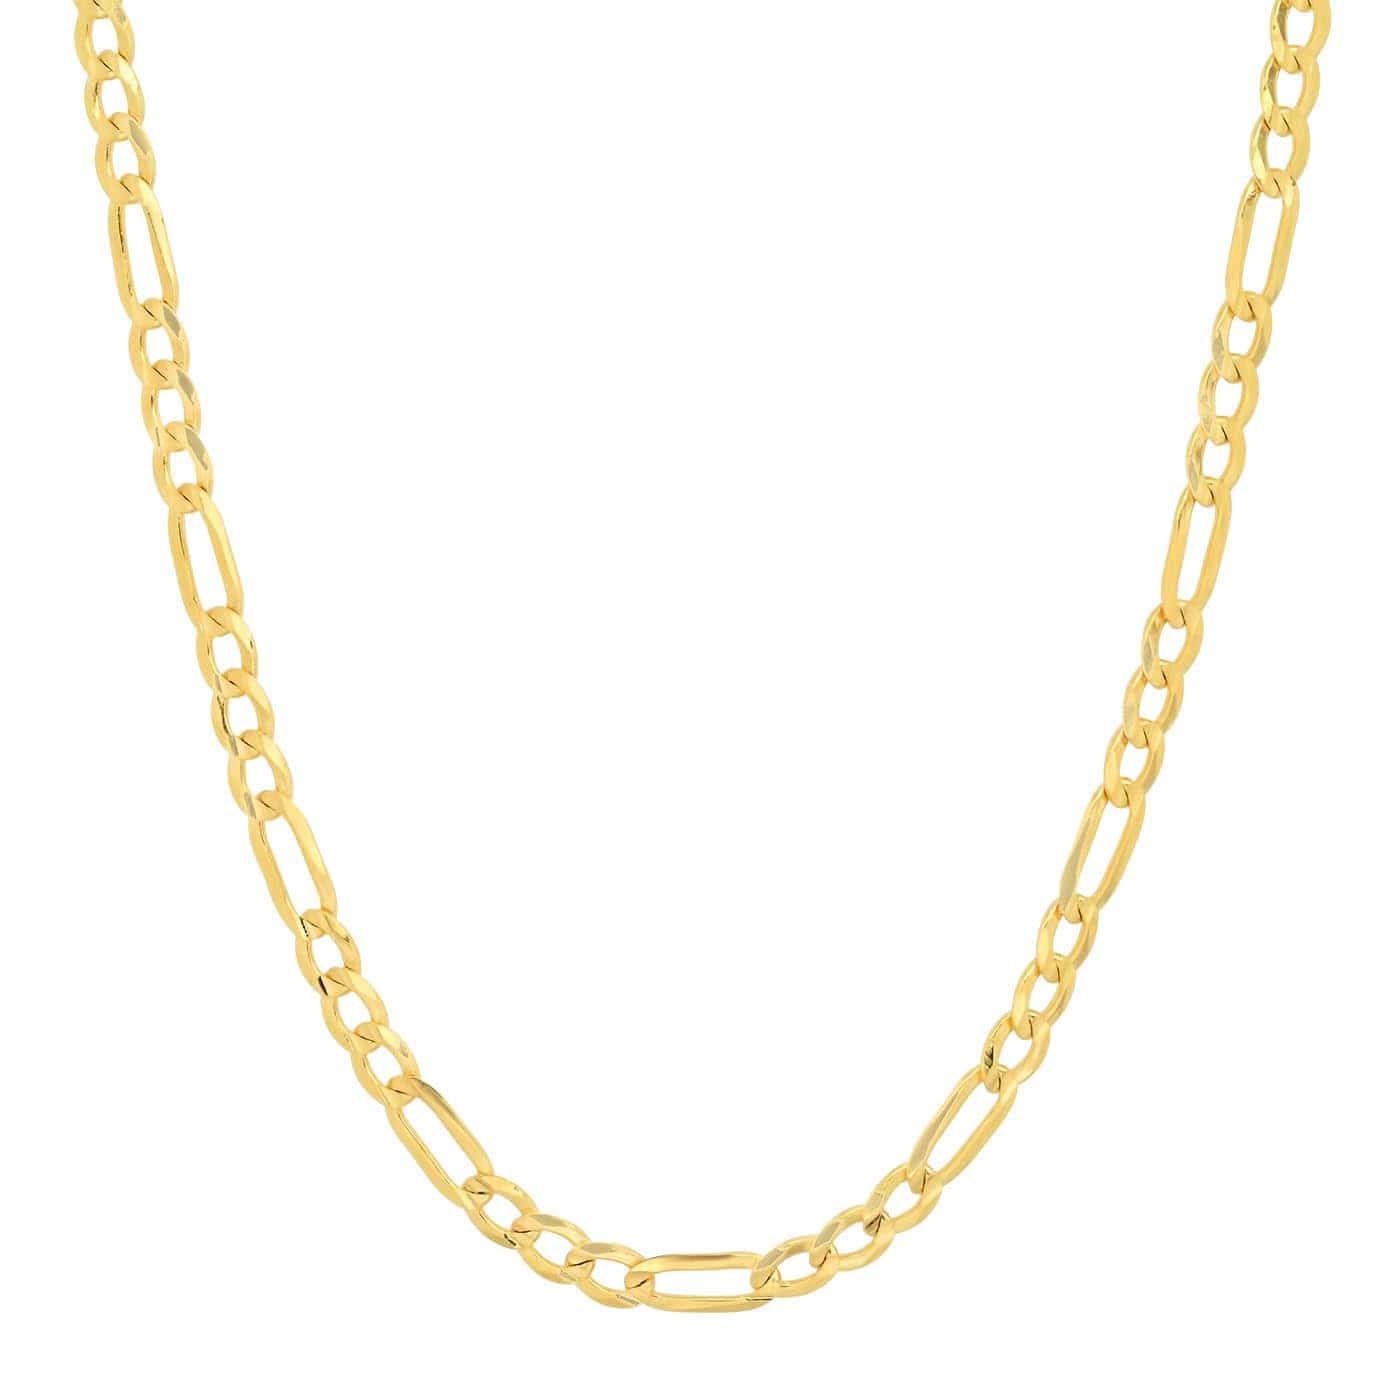 TAI JEWELRY Necklace Gold Figaro Chain Necklace